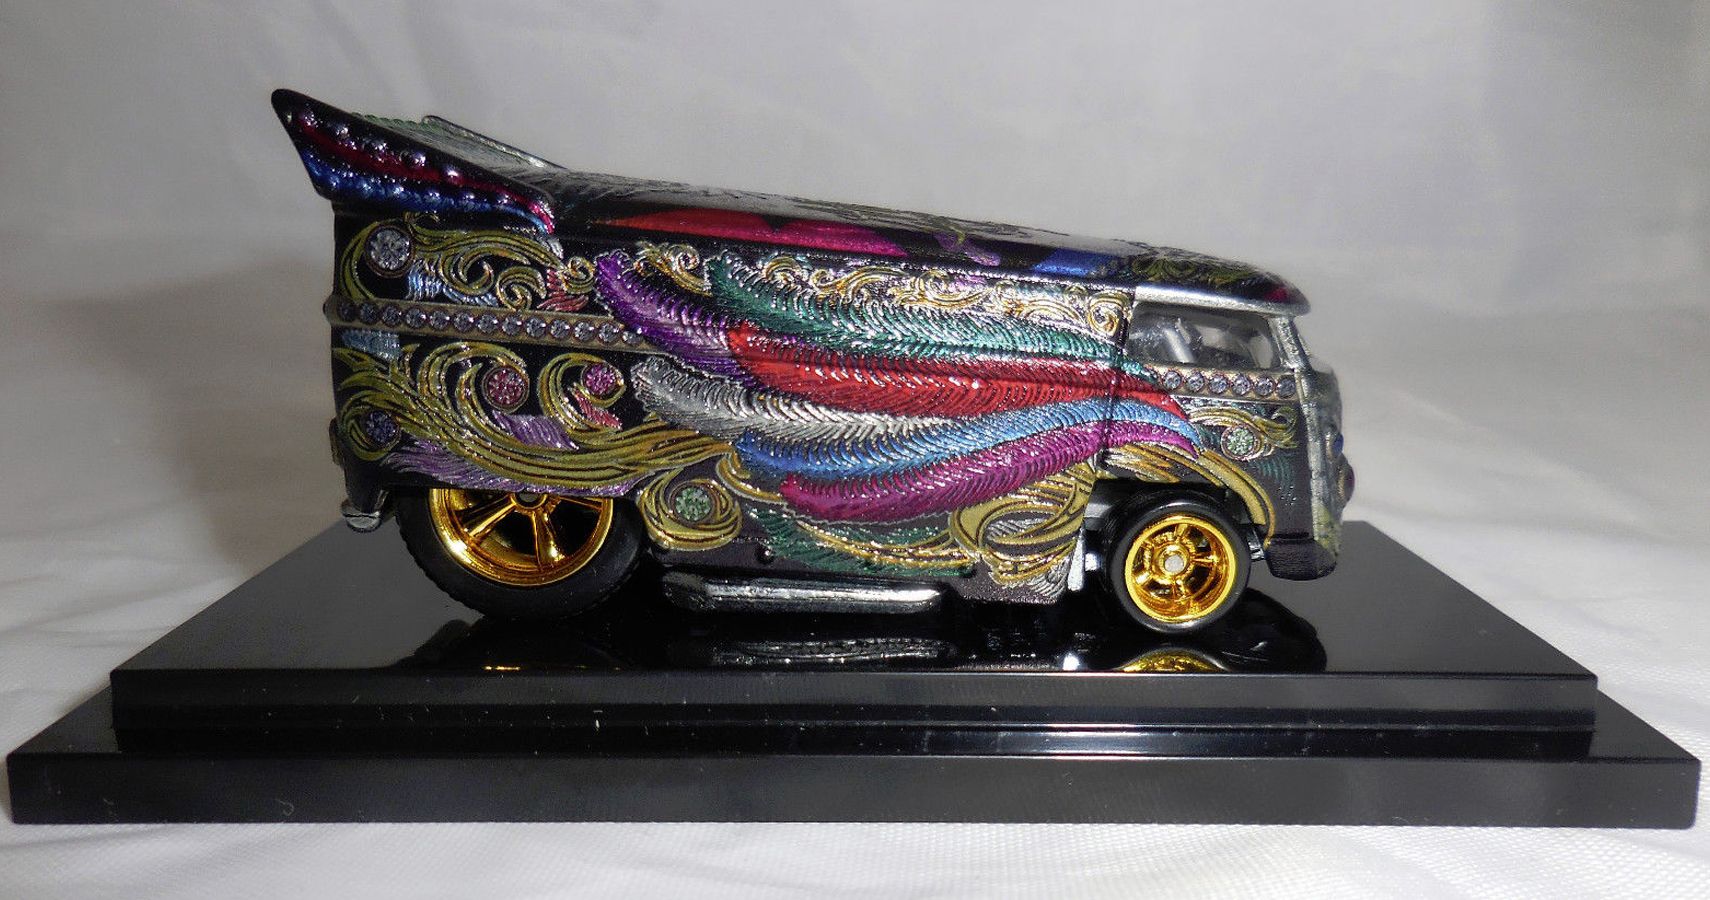 The 25 Rarest Hot Wheels Cars (And What They're Worth)